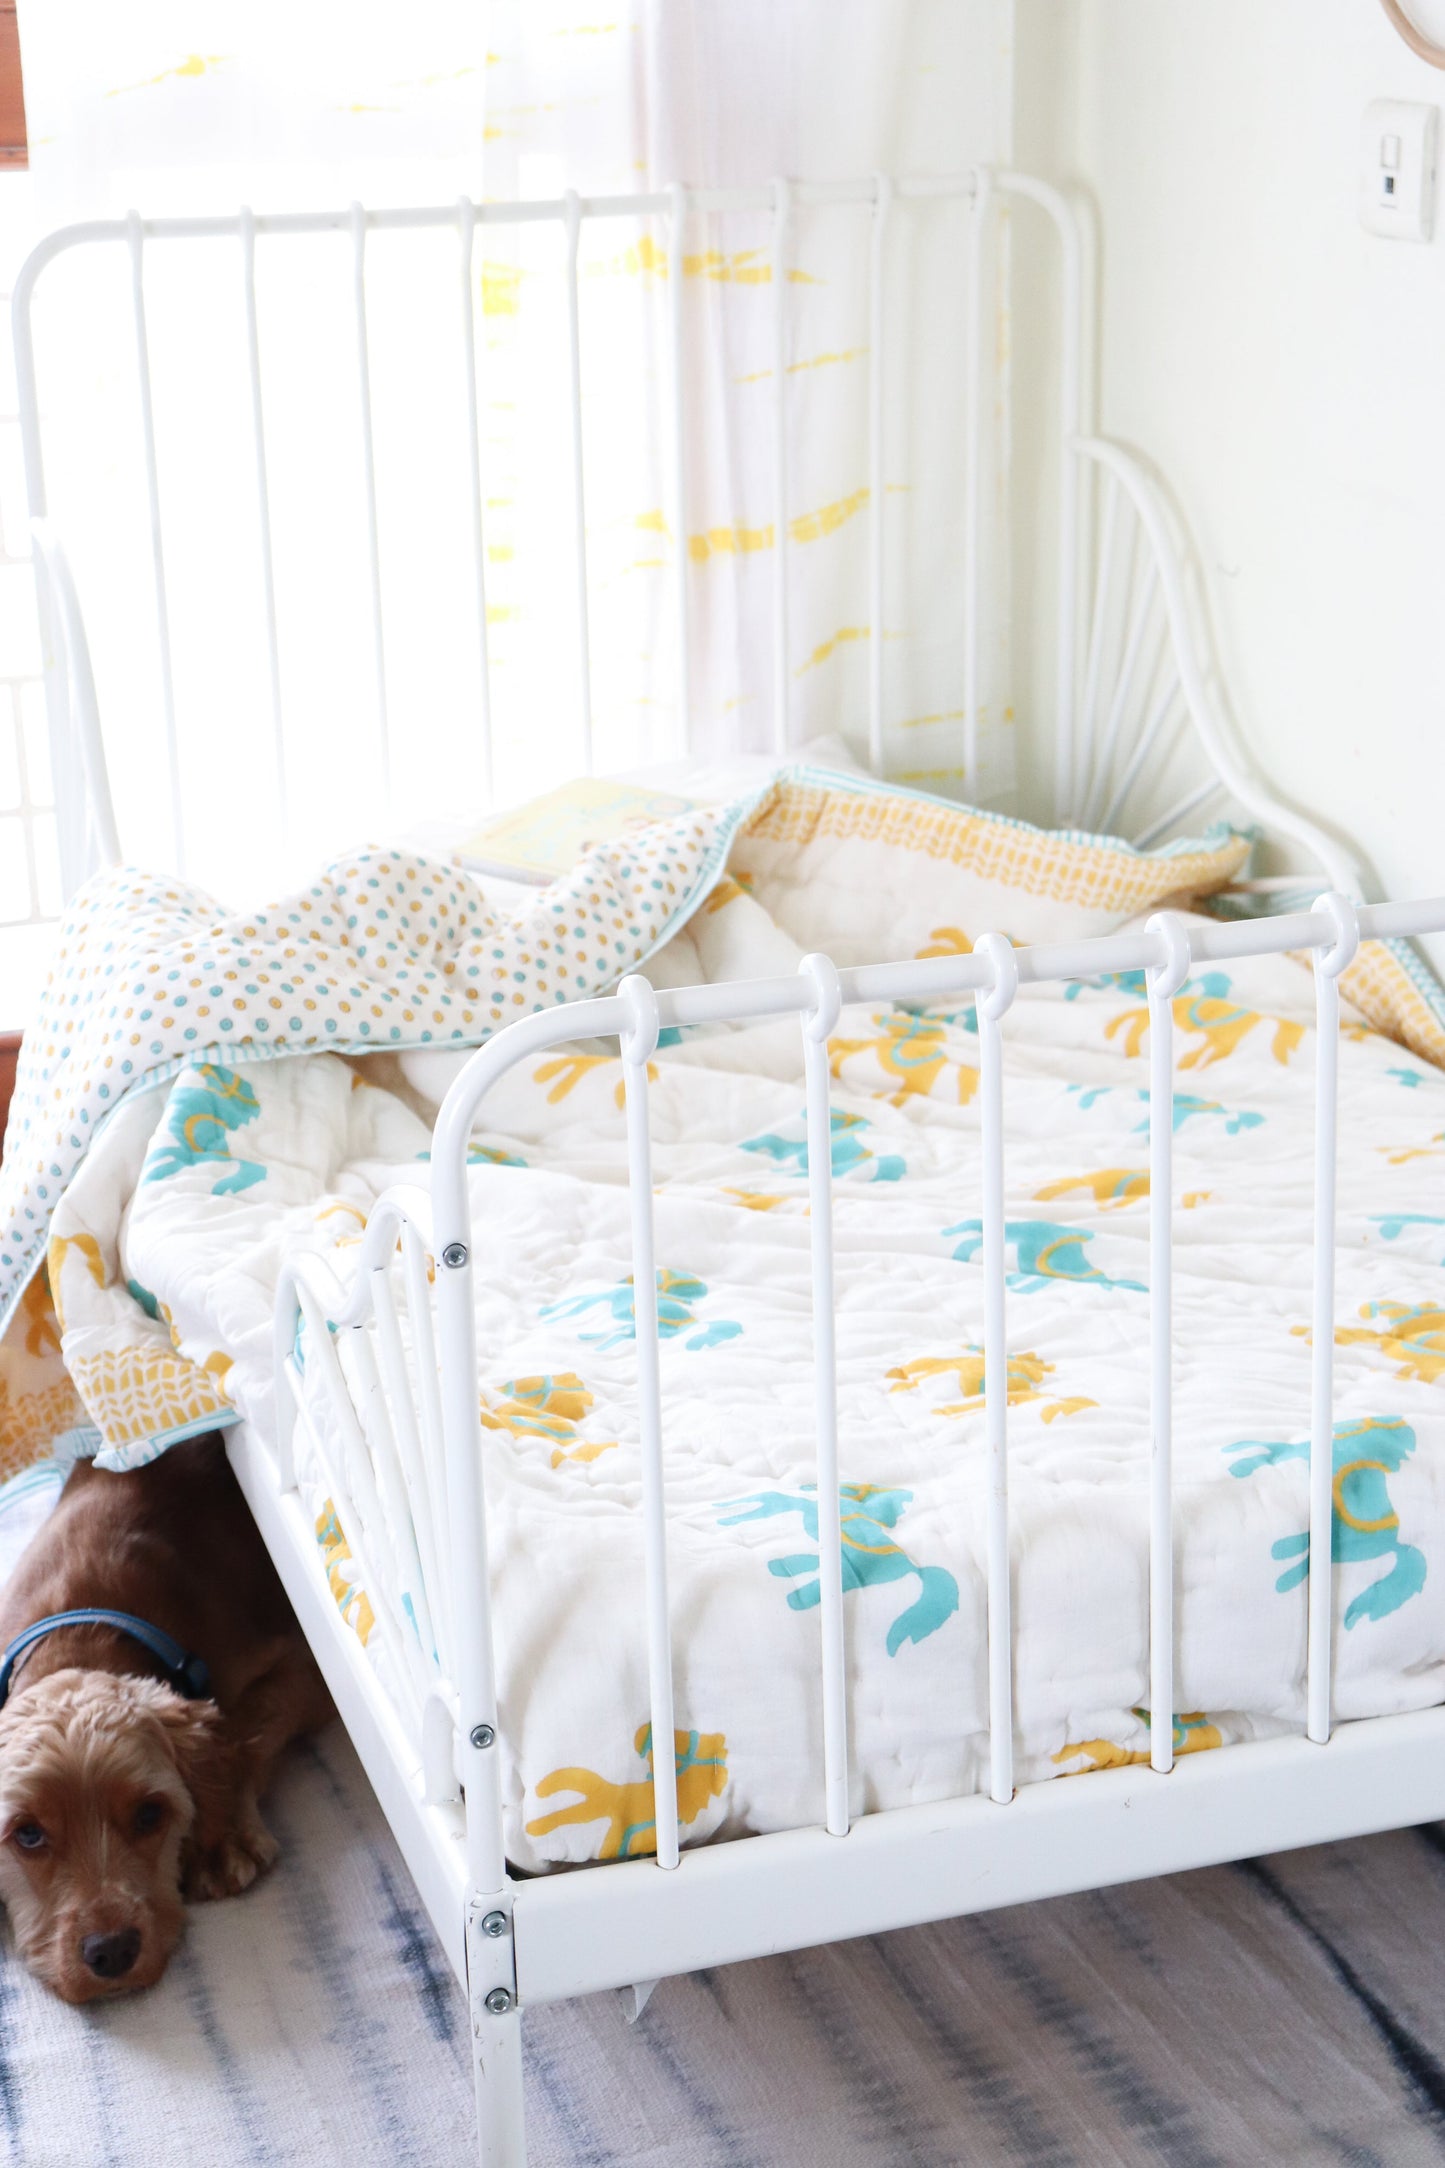 Kids cotton quilt - Horsey block print quilt - kids room bedding - Yellow and turquoise horses